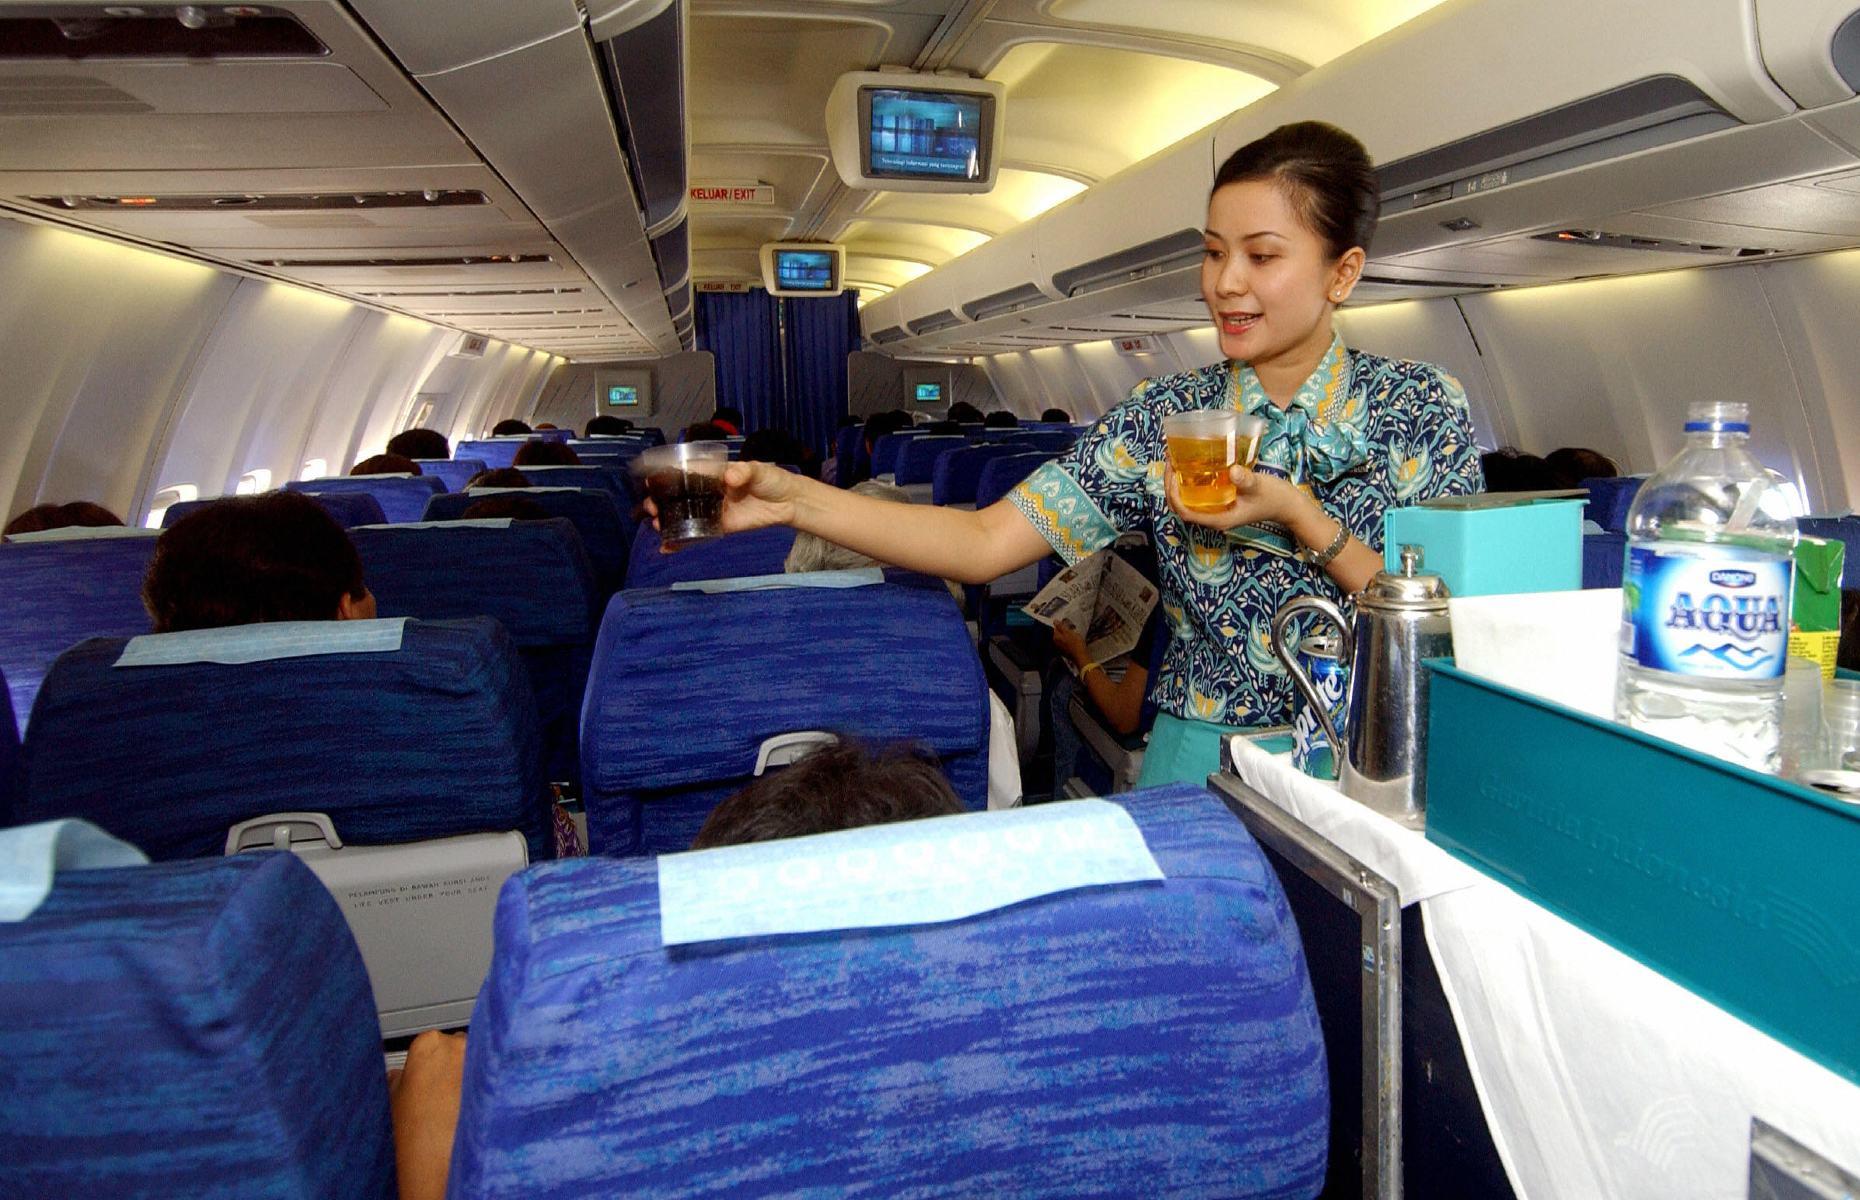 The airline prides itself on sharing Indonesia’s traditional hospitality and unique culture with its passengers. The Skytrax website rates Garuda Indonesia five stars for customer service, with reviews praising the cabin crew’s attentive, welcoming, courteous and compassionate manner.